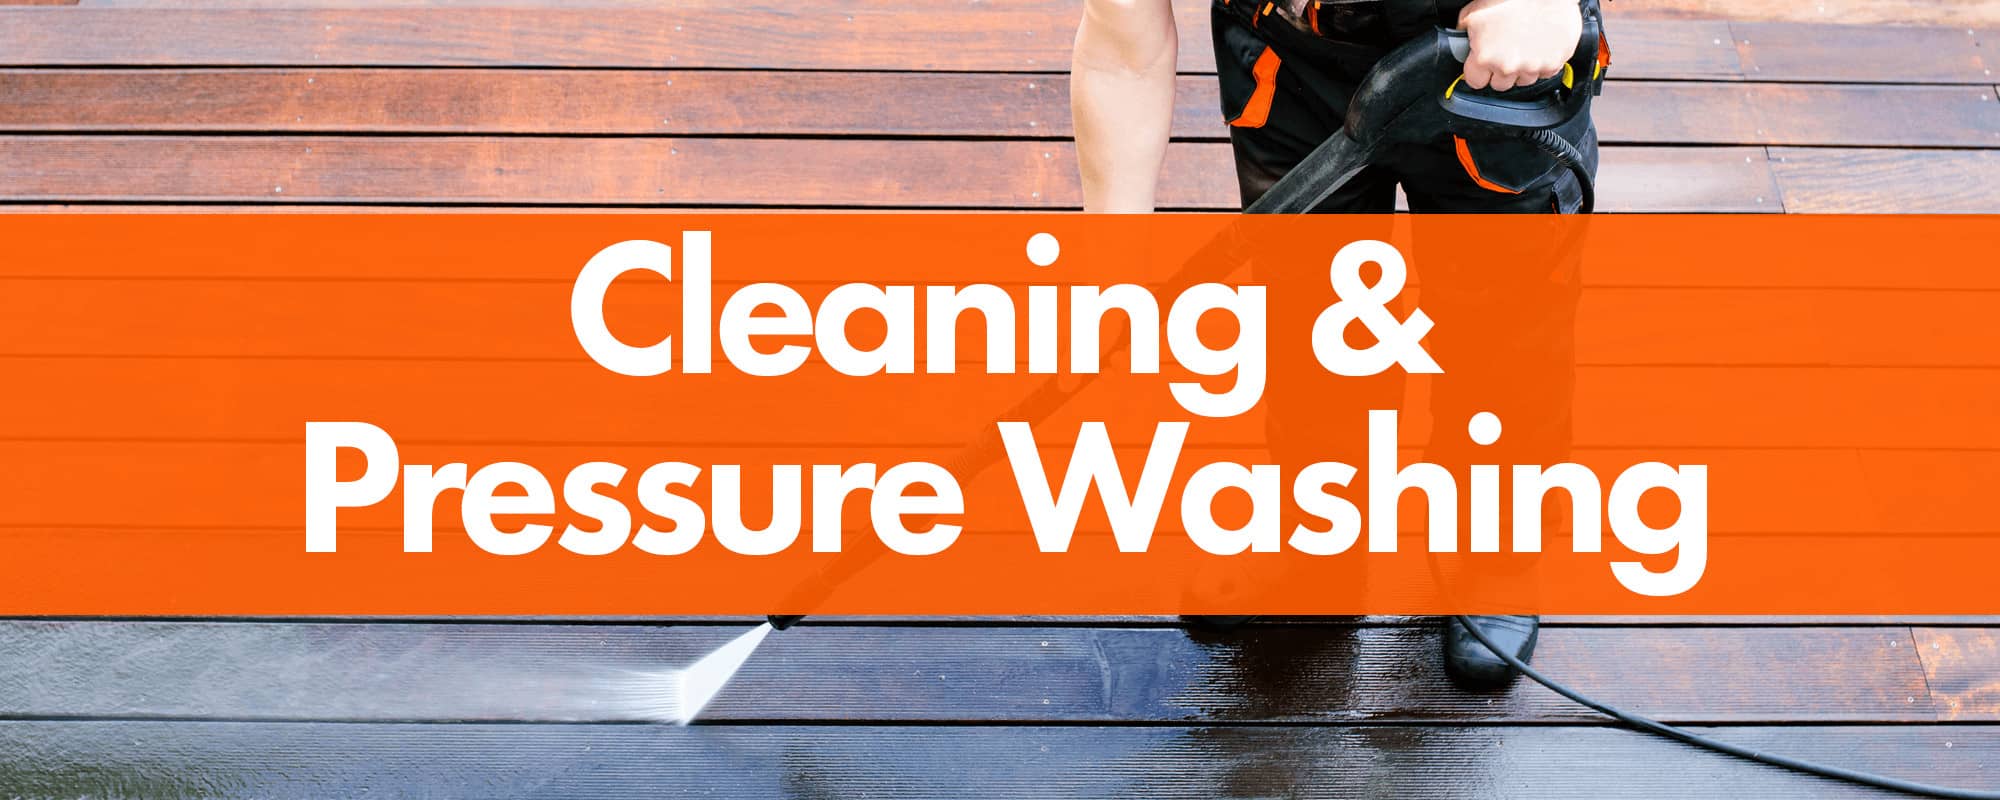 Featured image for “Pressure Washing”